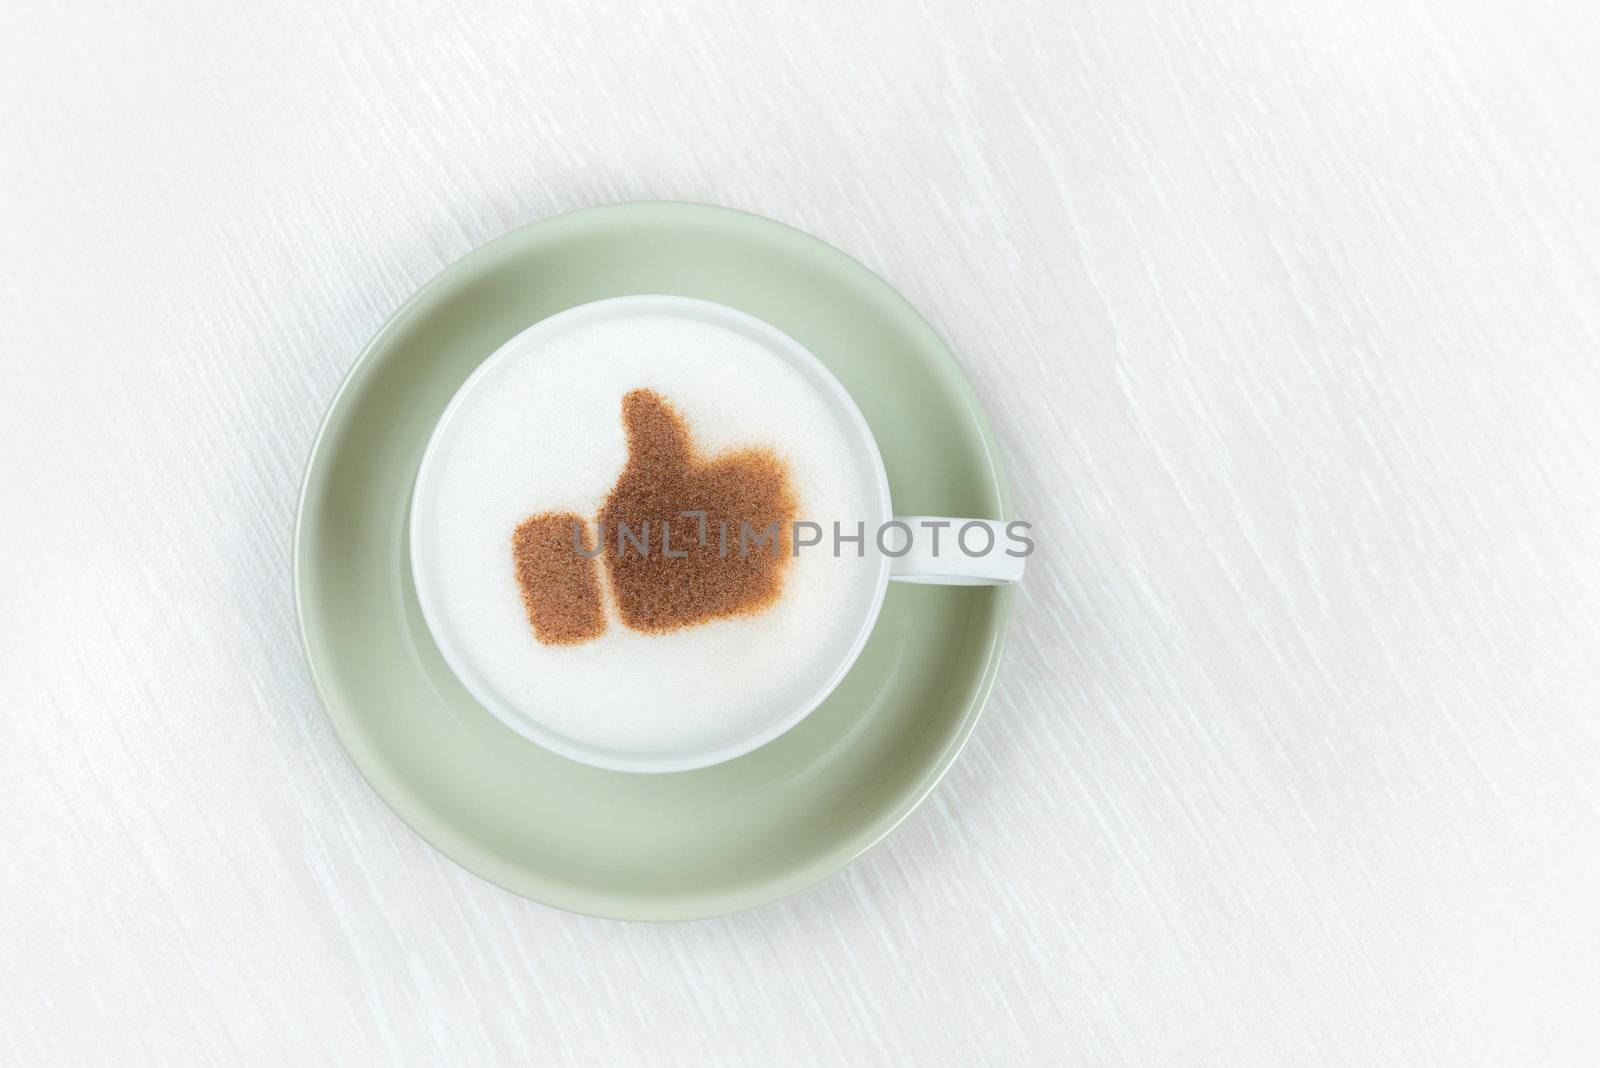 Top view of a cup filled with frothy cappuccino with a brown thumbs up sign in cocoa powder depicting success, praise and approval on a white table top with copyspace.